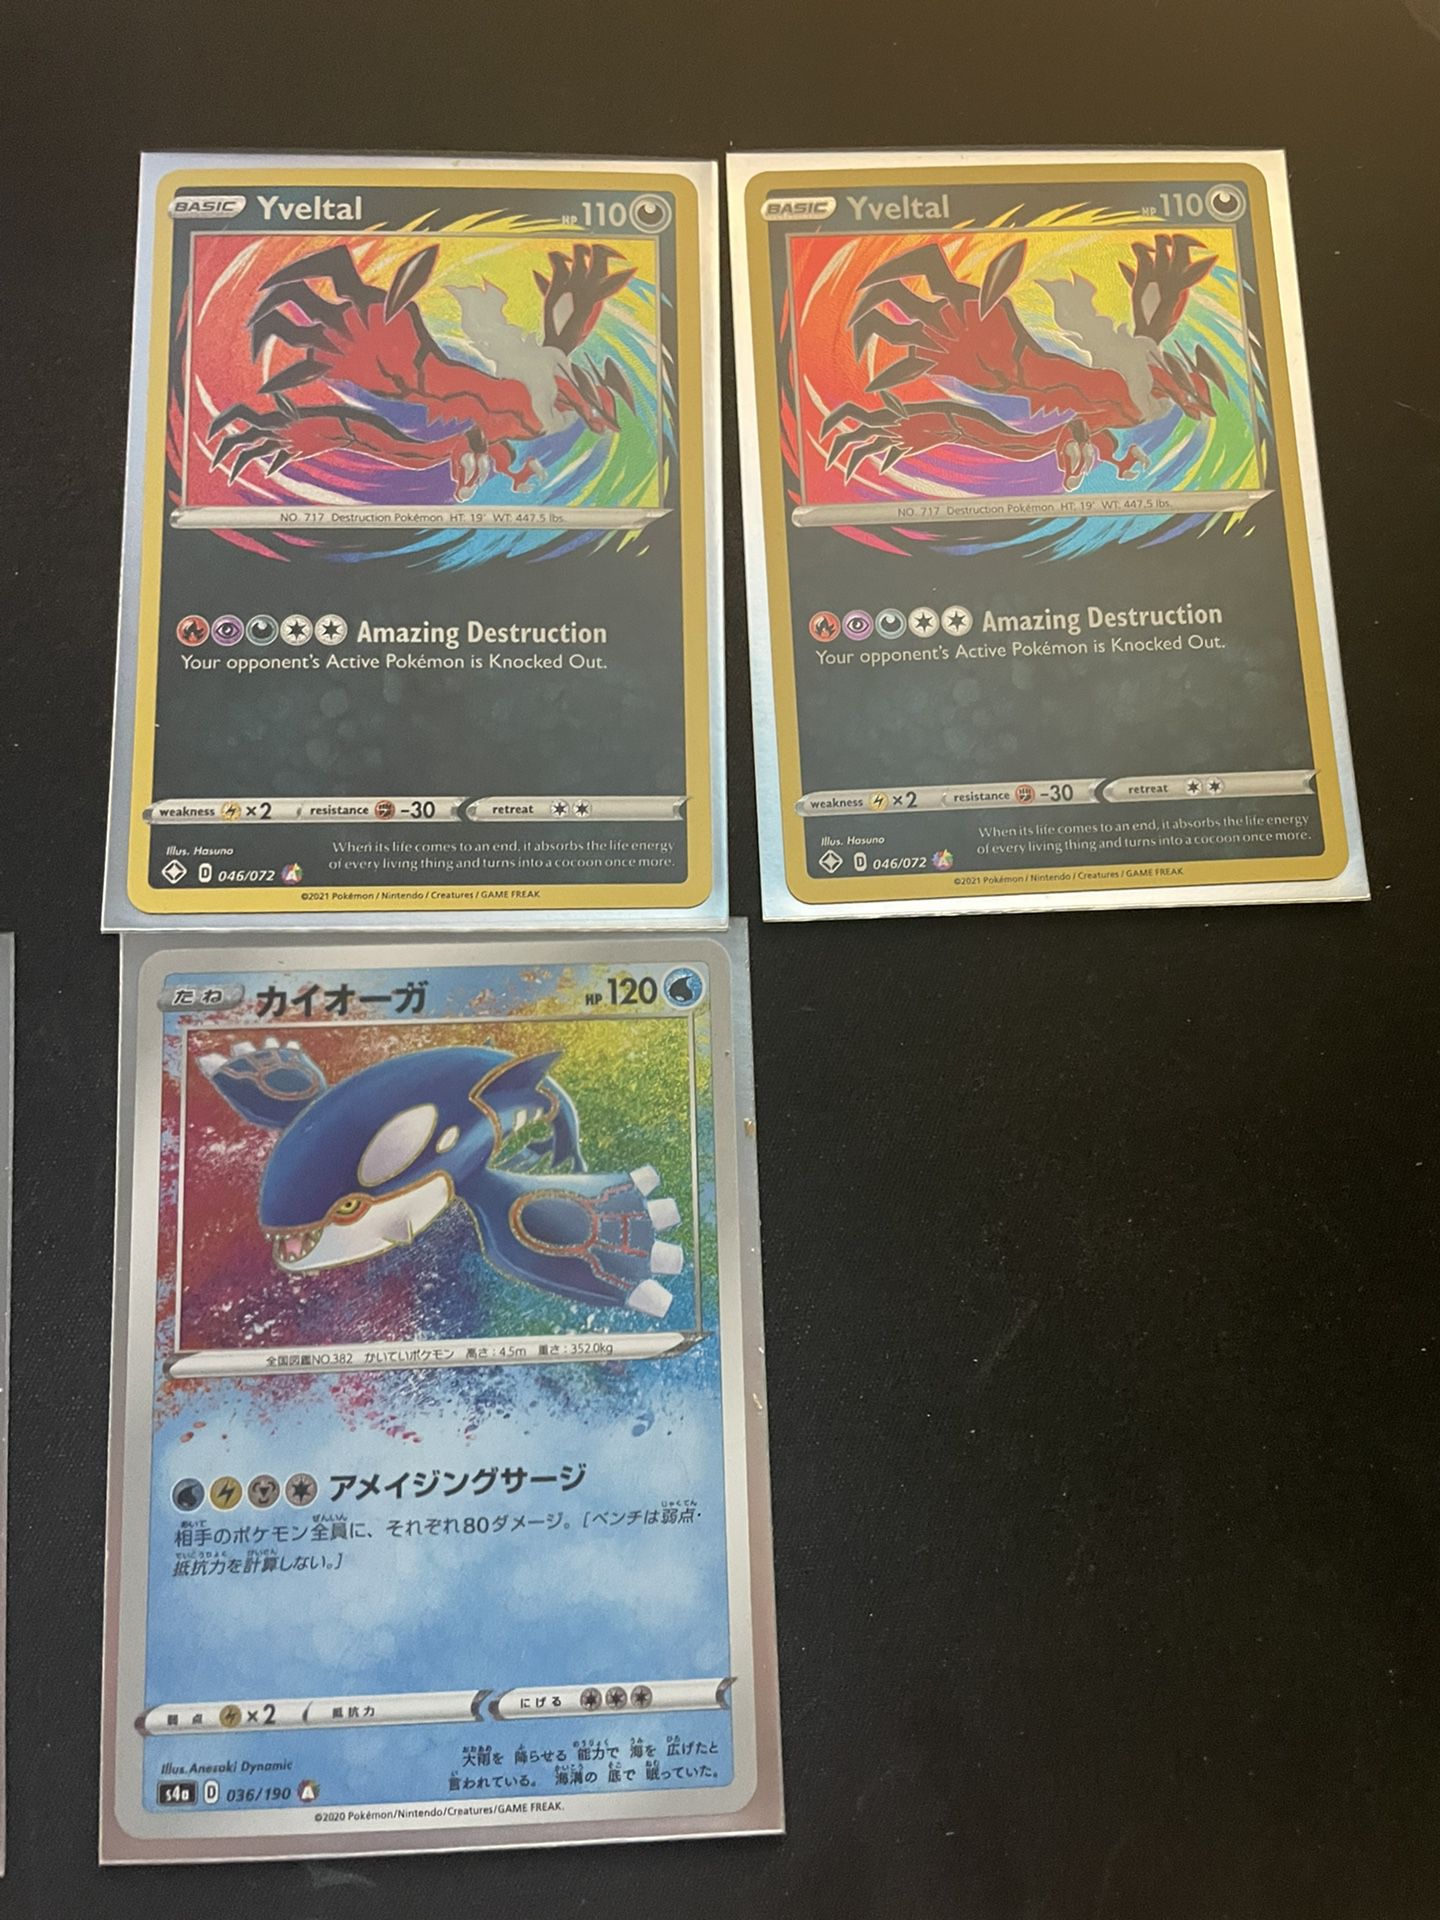 Genesect V Full Art for Sale in San Diego, CA - OfferUp